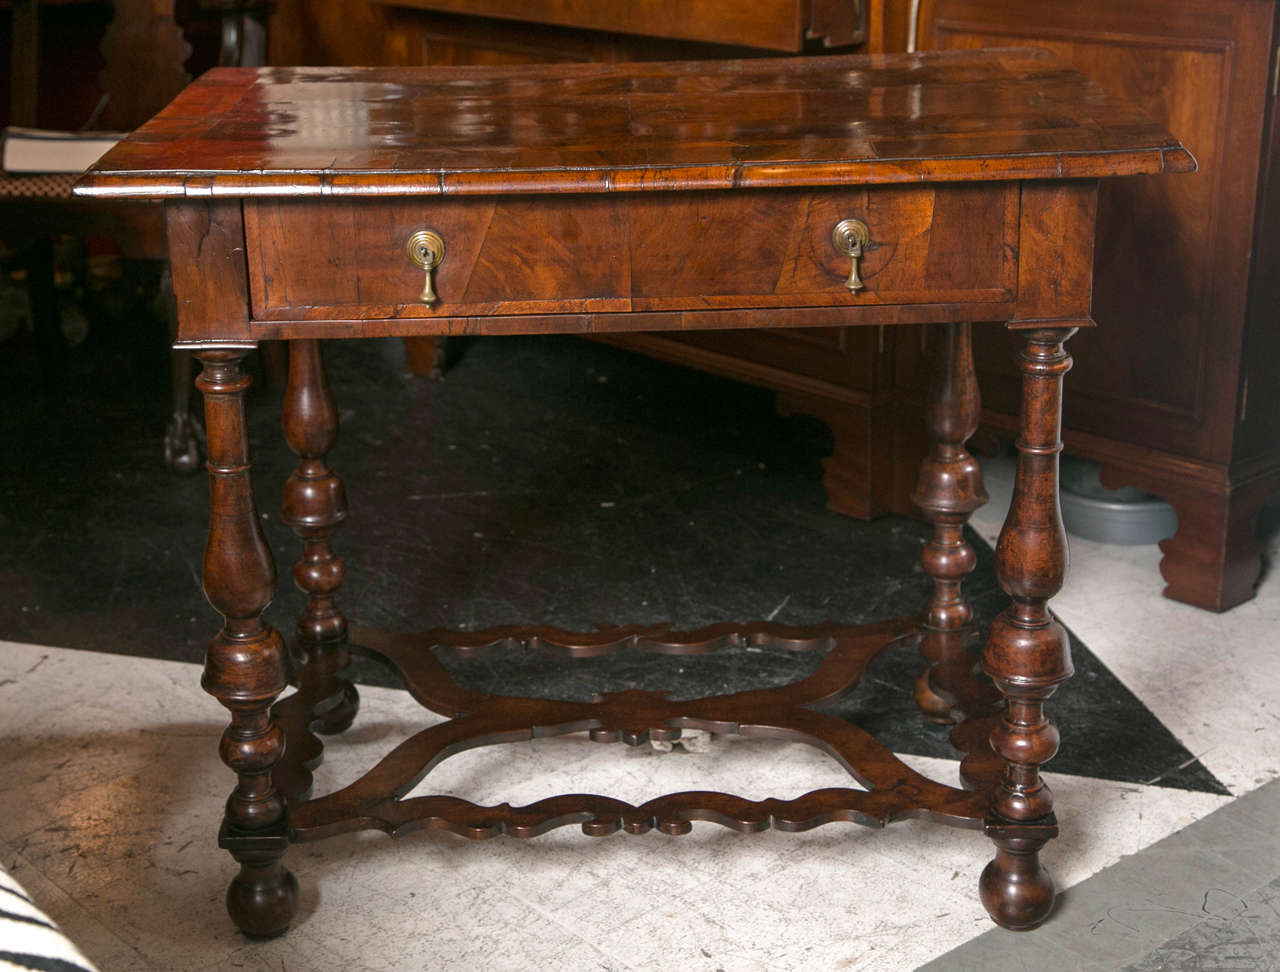 A wonderful 17th century William and Mary two drawer table.